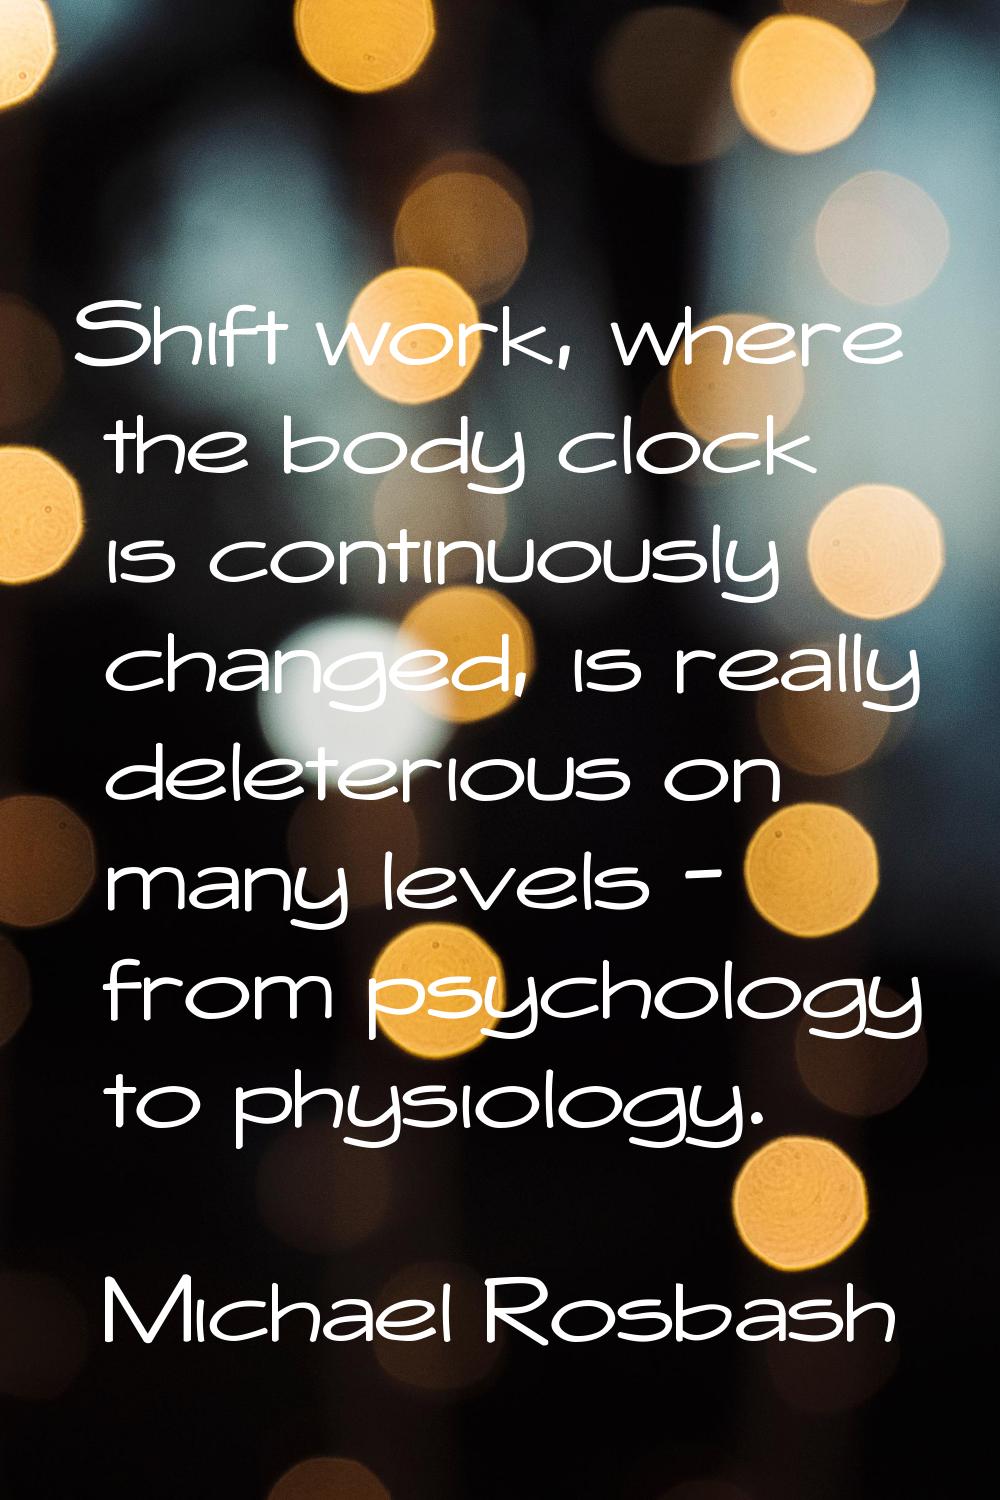 Shift work, where the body clock is continuously changed, is really deleterious on many levels - fr